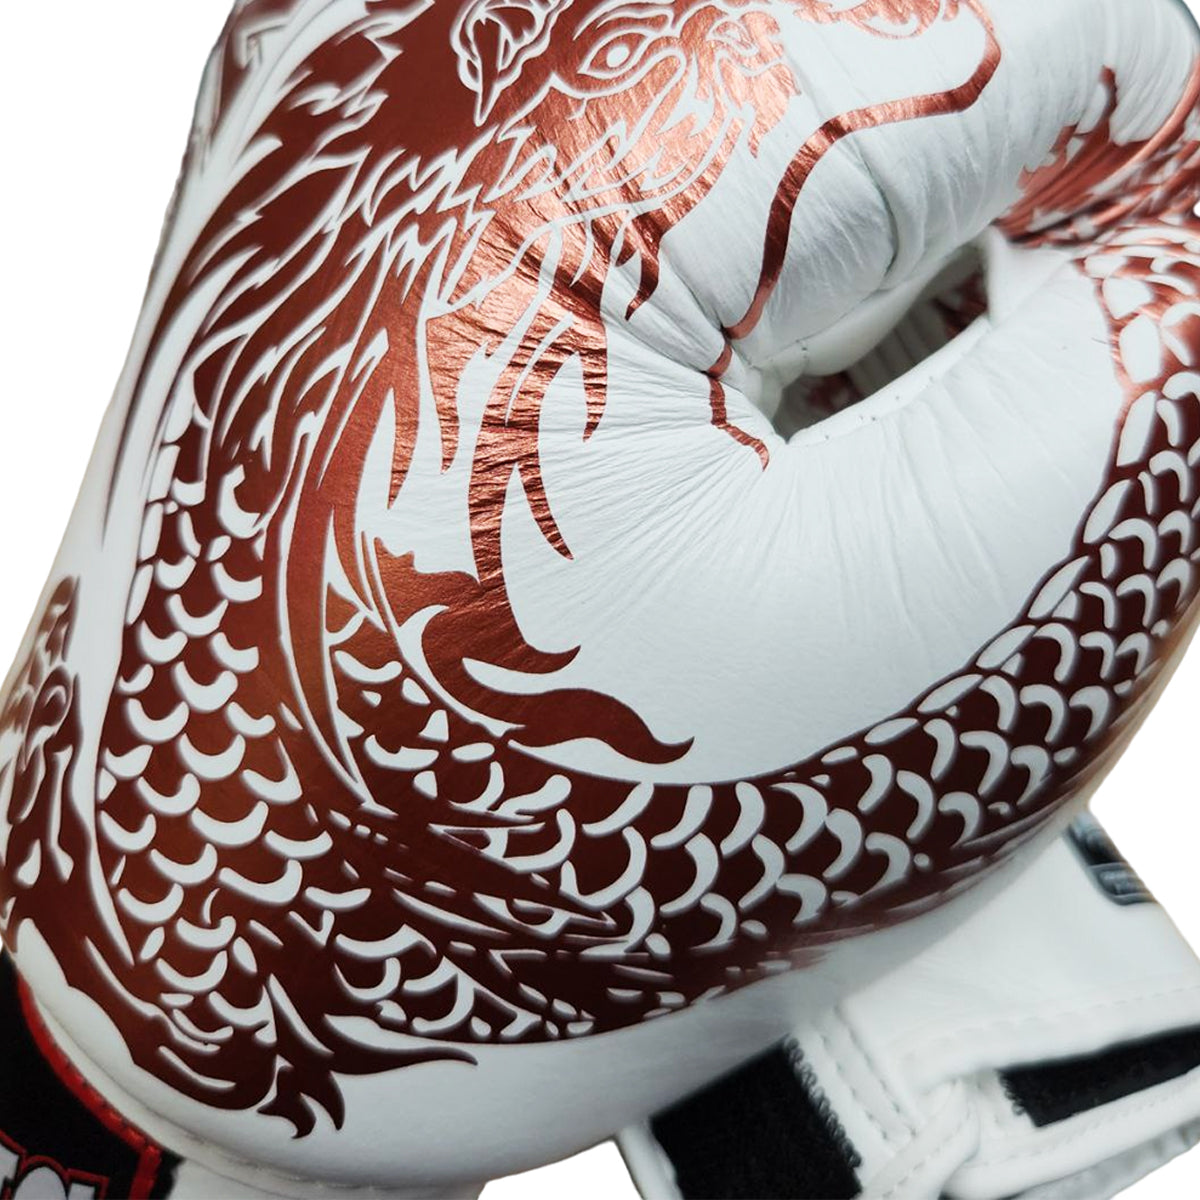 Boxing Gloves Twins Special FBGV-49 Copper White Fancy